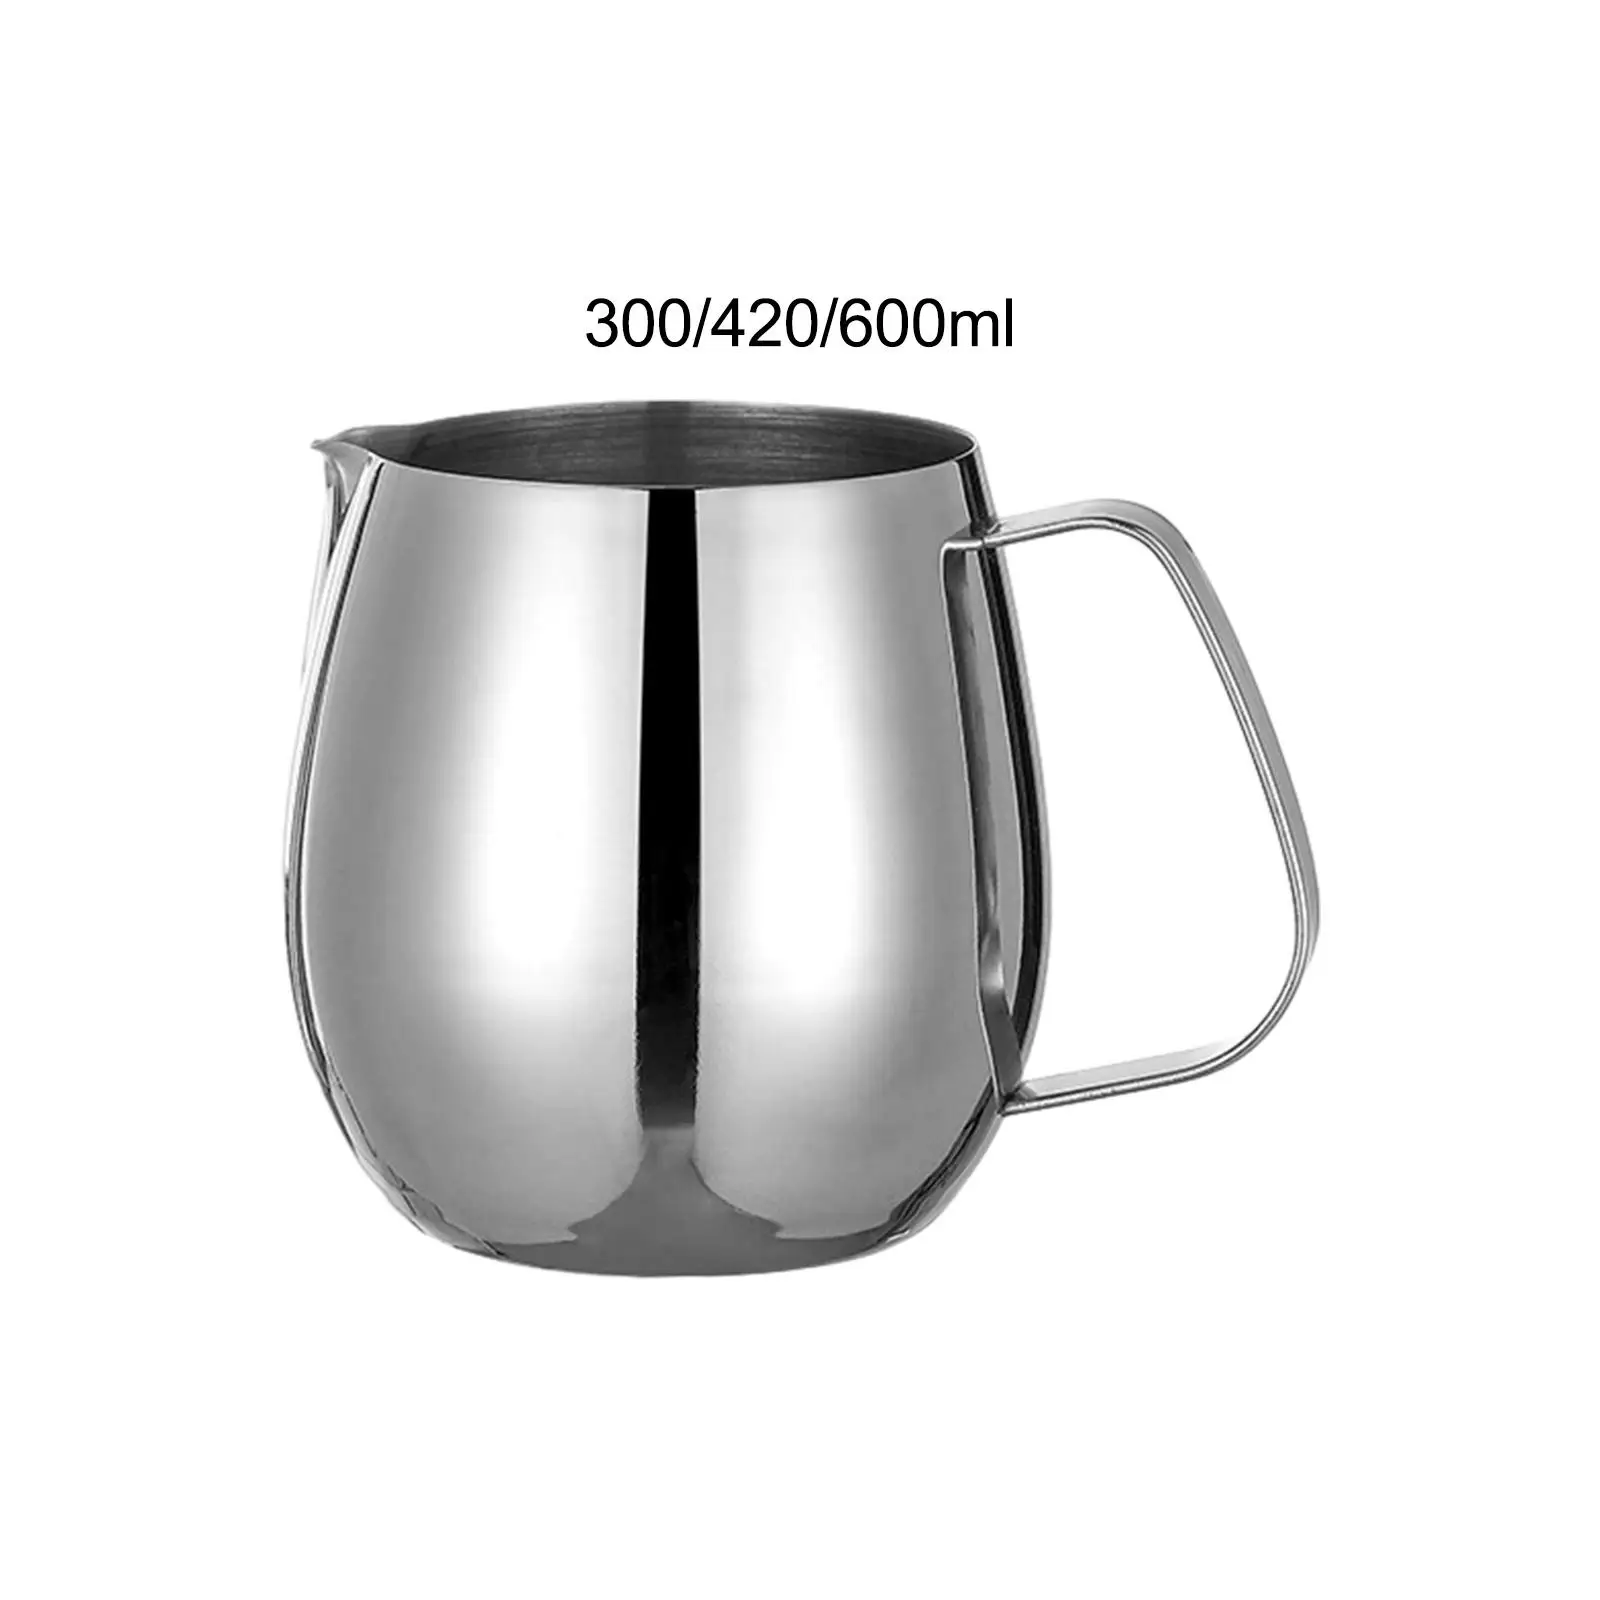 Milk Frothing Pitcher Jug Espresso Steaming Pitcher Nonstick Latte Art Tool for Coffee Cappuccino Matcha Household Restaurants